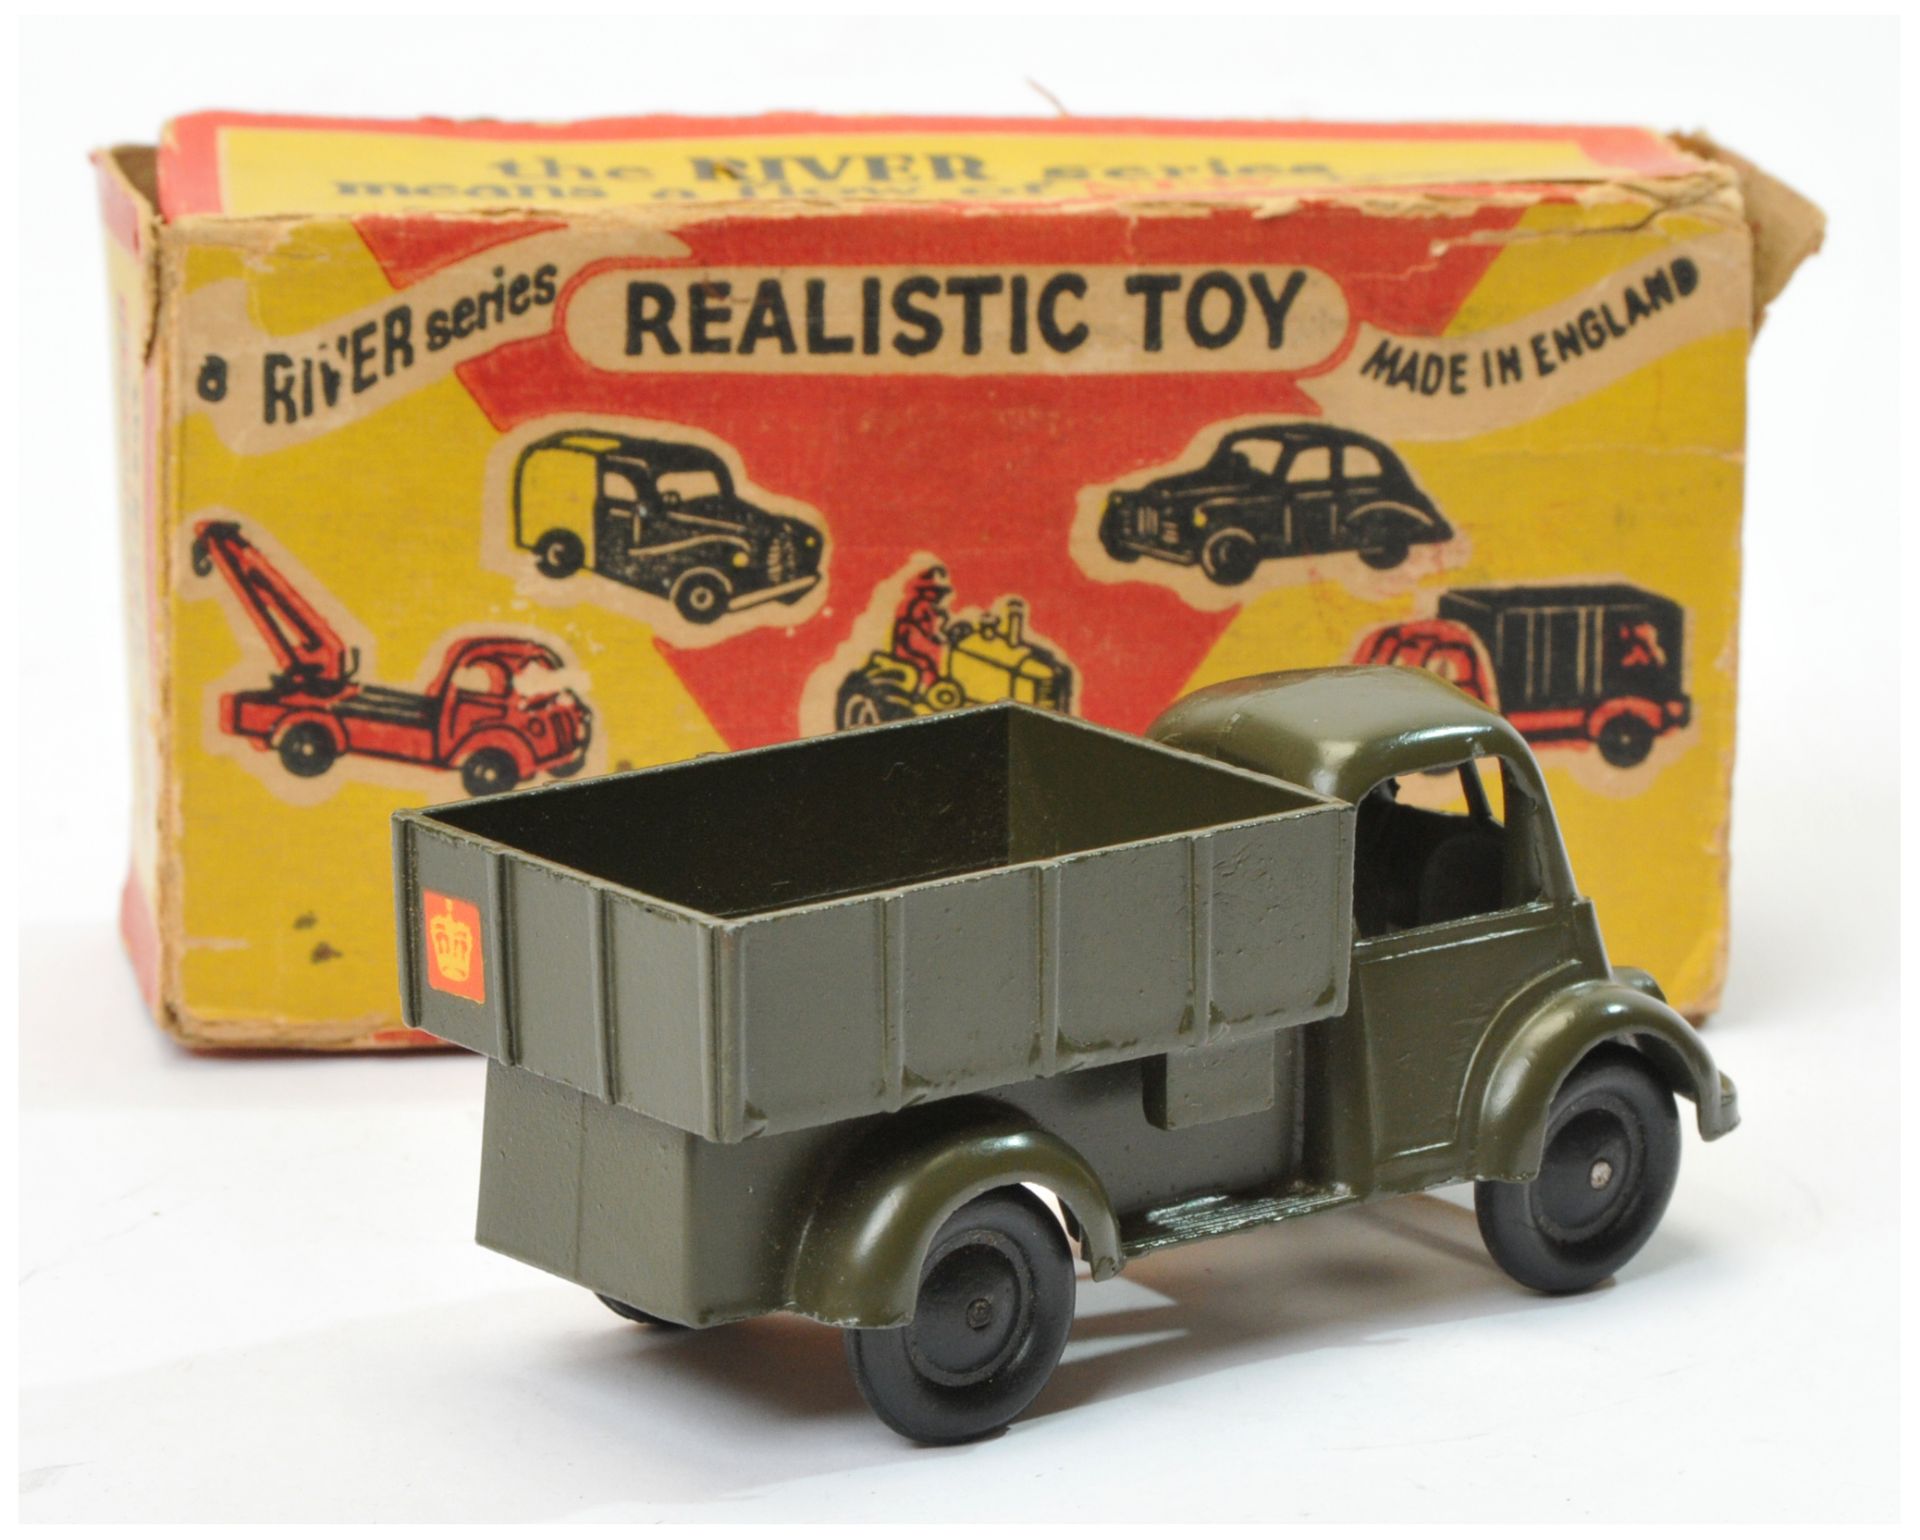 River Series Military open back lorry  - dark military olive green, black wheels with rear decal  - Bild 2 aus 2